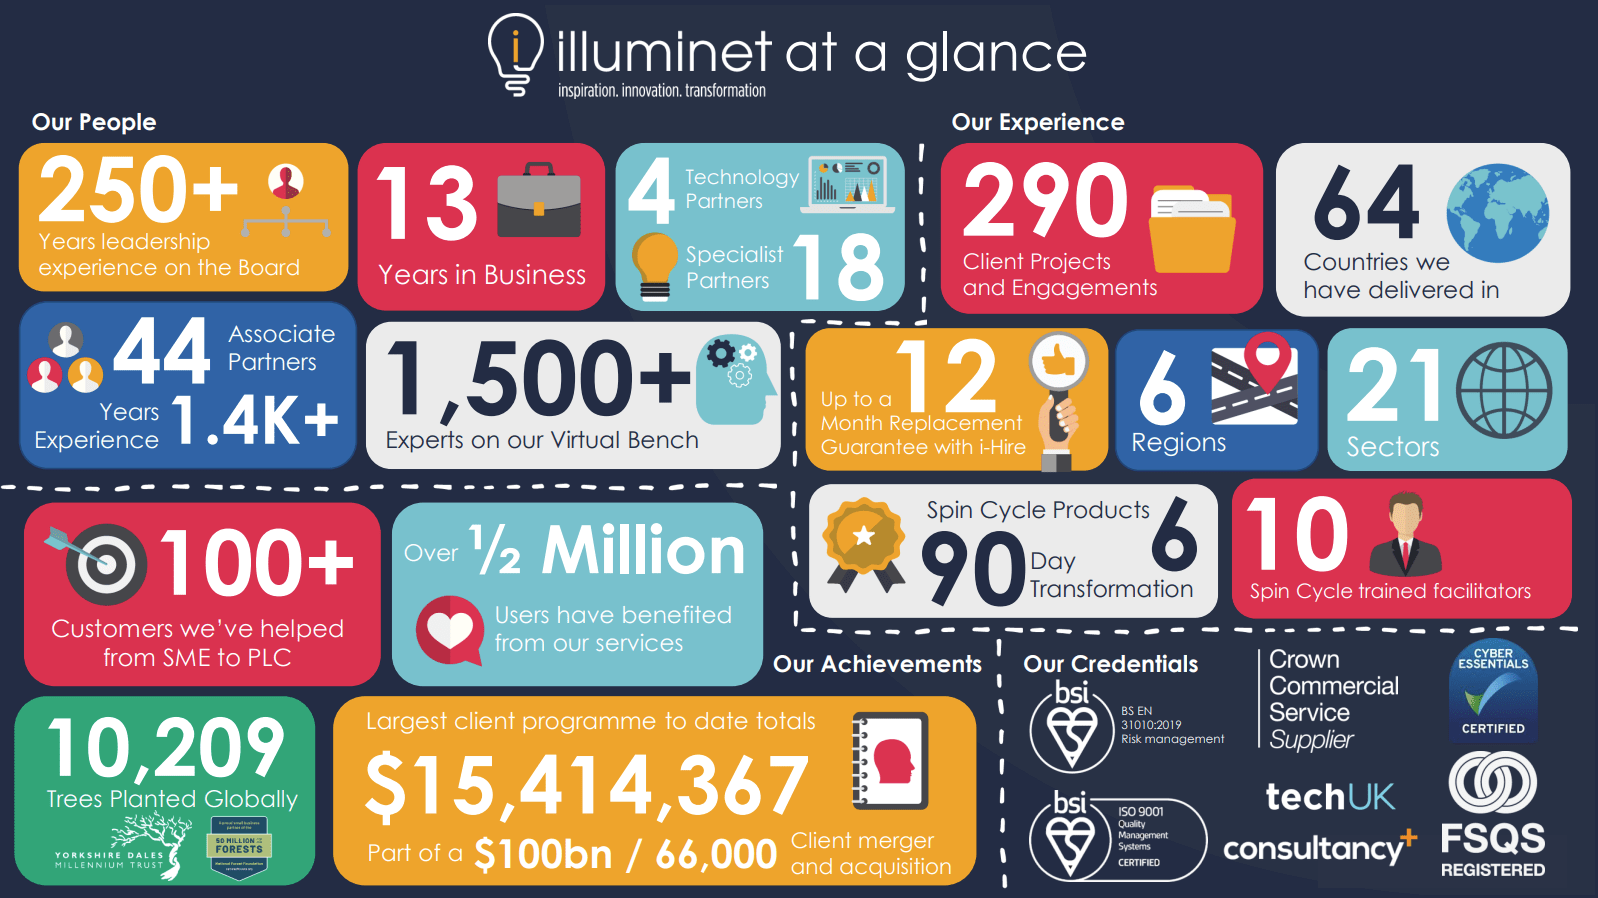 Illuminet's people, experience, achievements and credentials